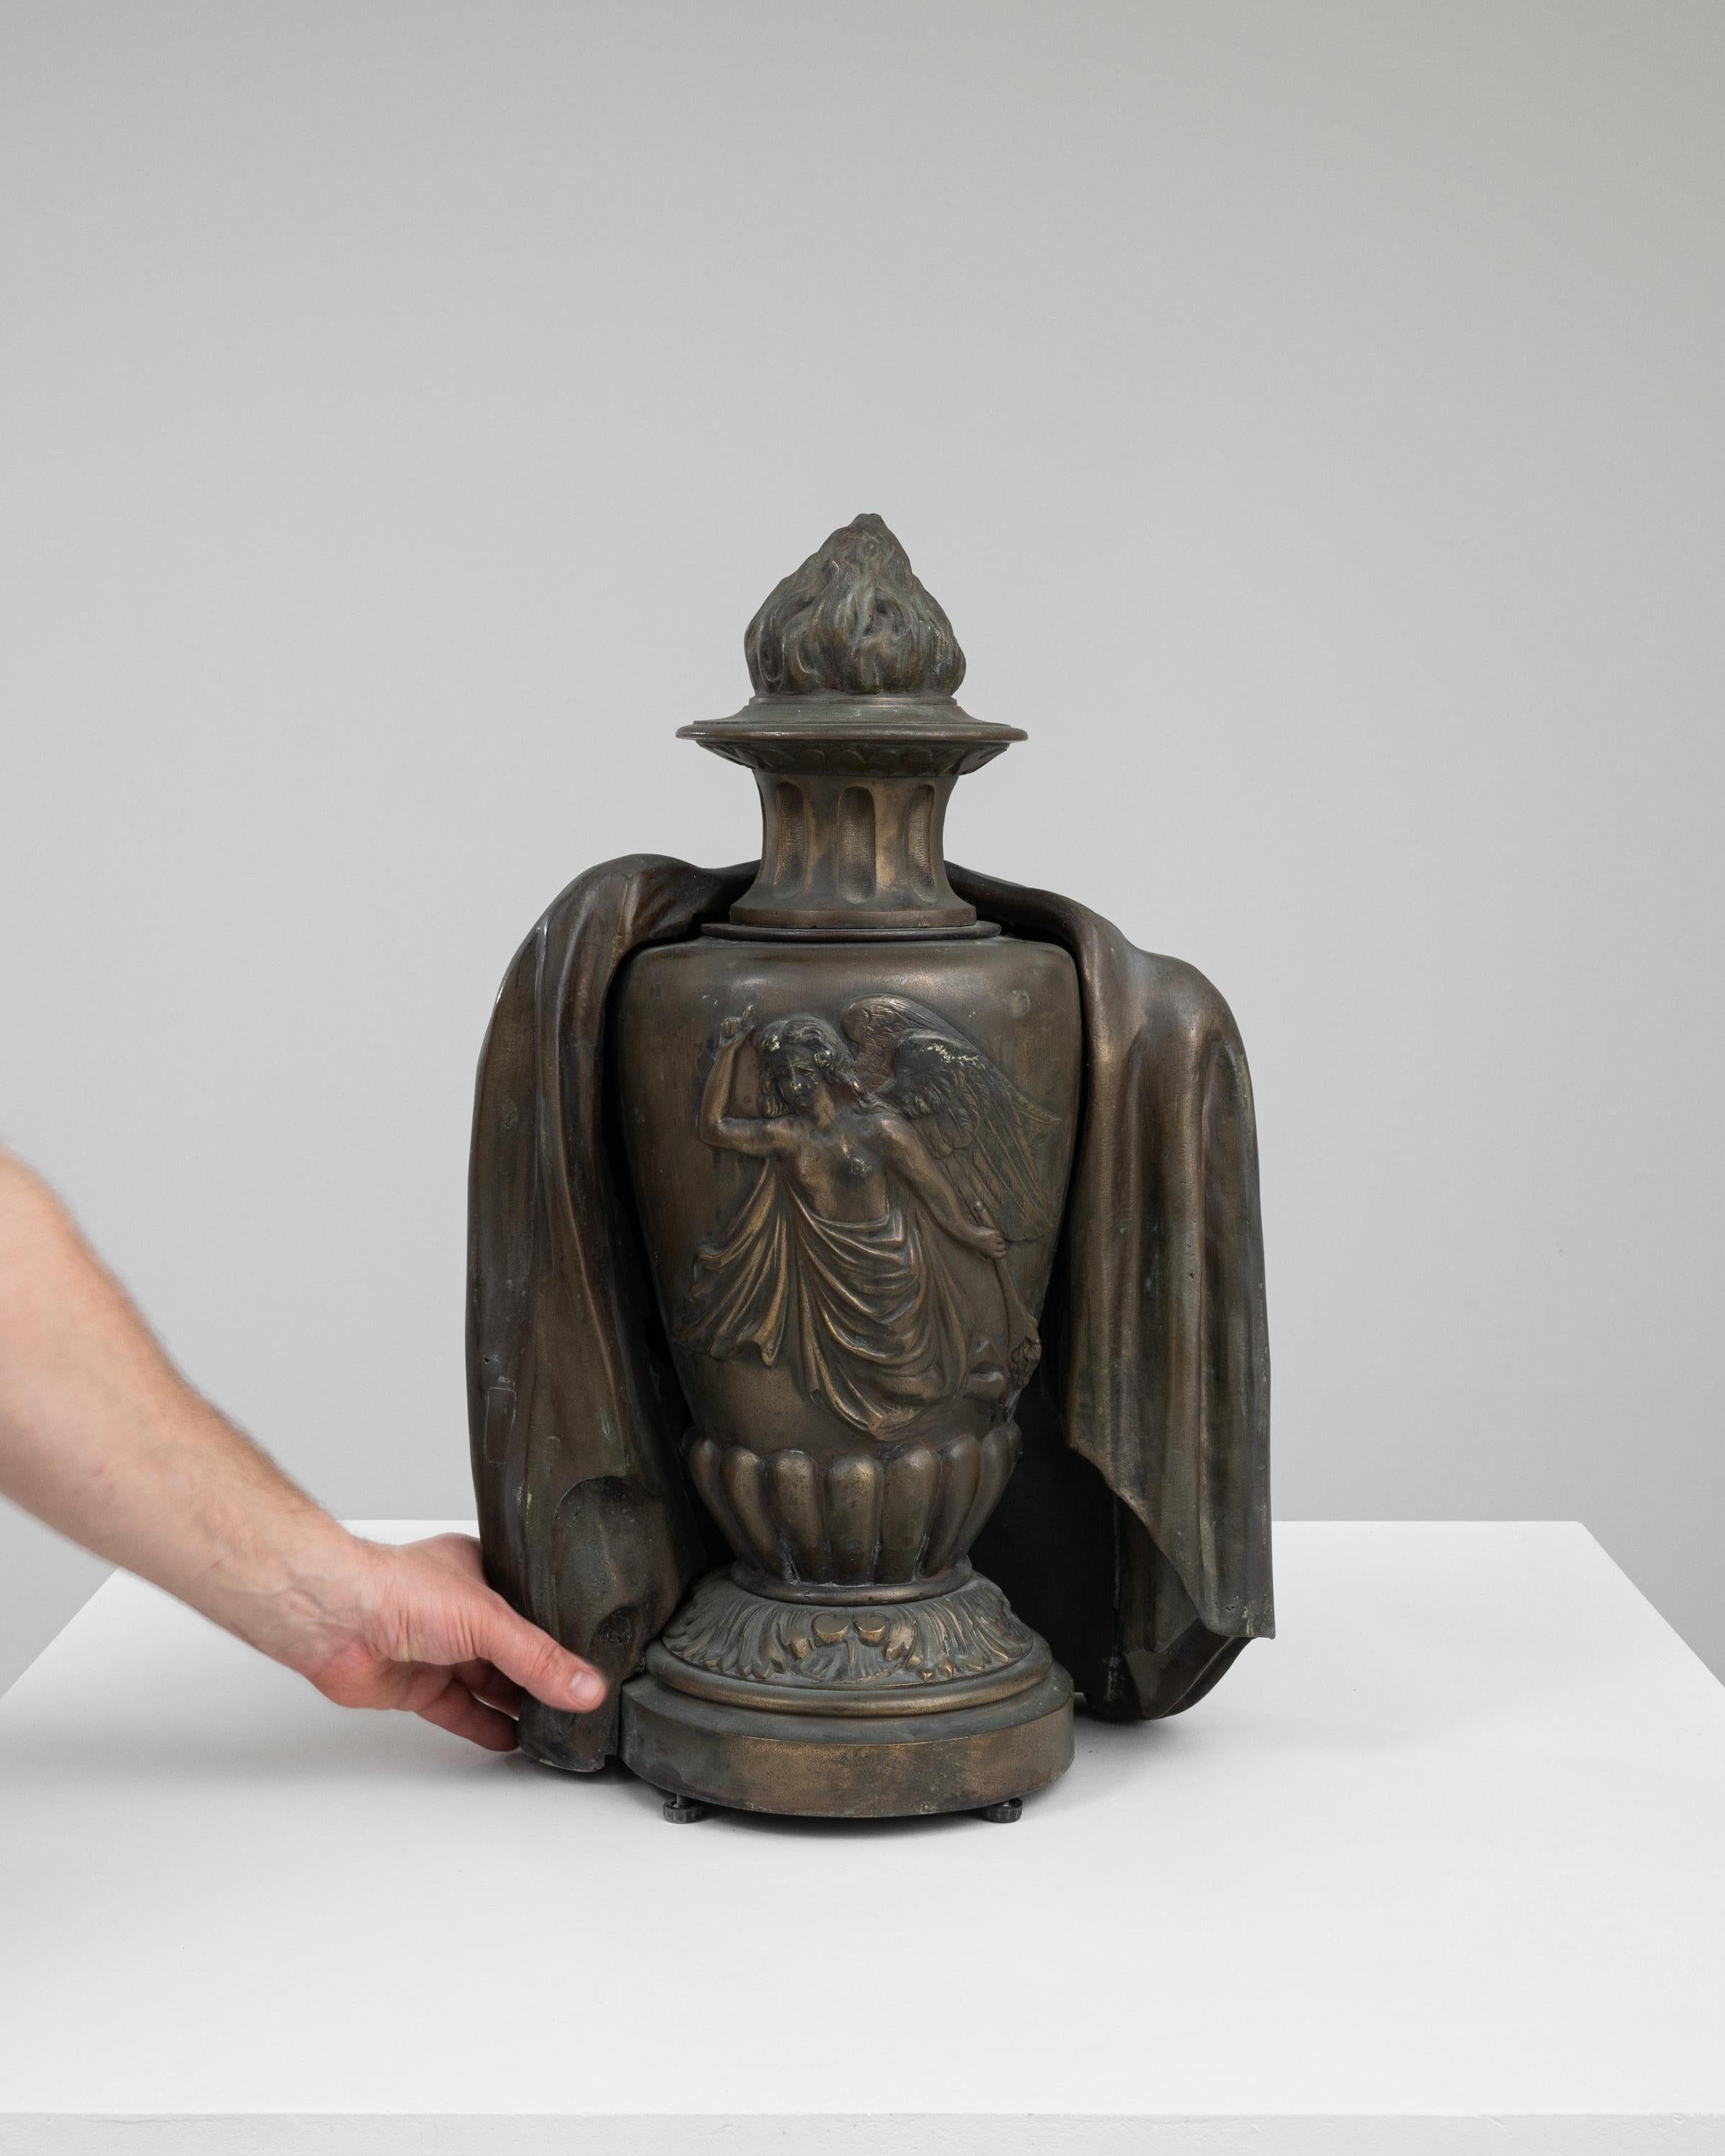 This captivating 1900s French bronze urn is an exquisite relic that embodies the artistry and mystique of its time. Draped with the graceful folds of a classical robe, the urn is adorned with the serene, sculpted figure of an angel, bringing an aura